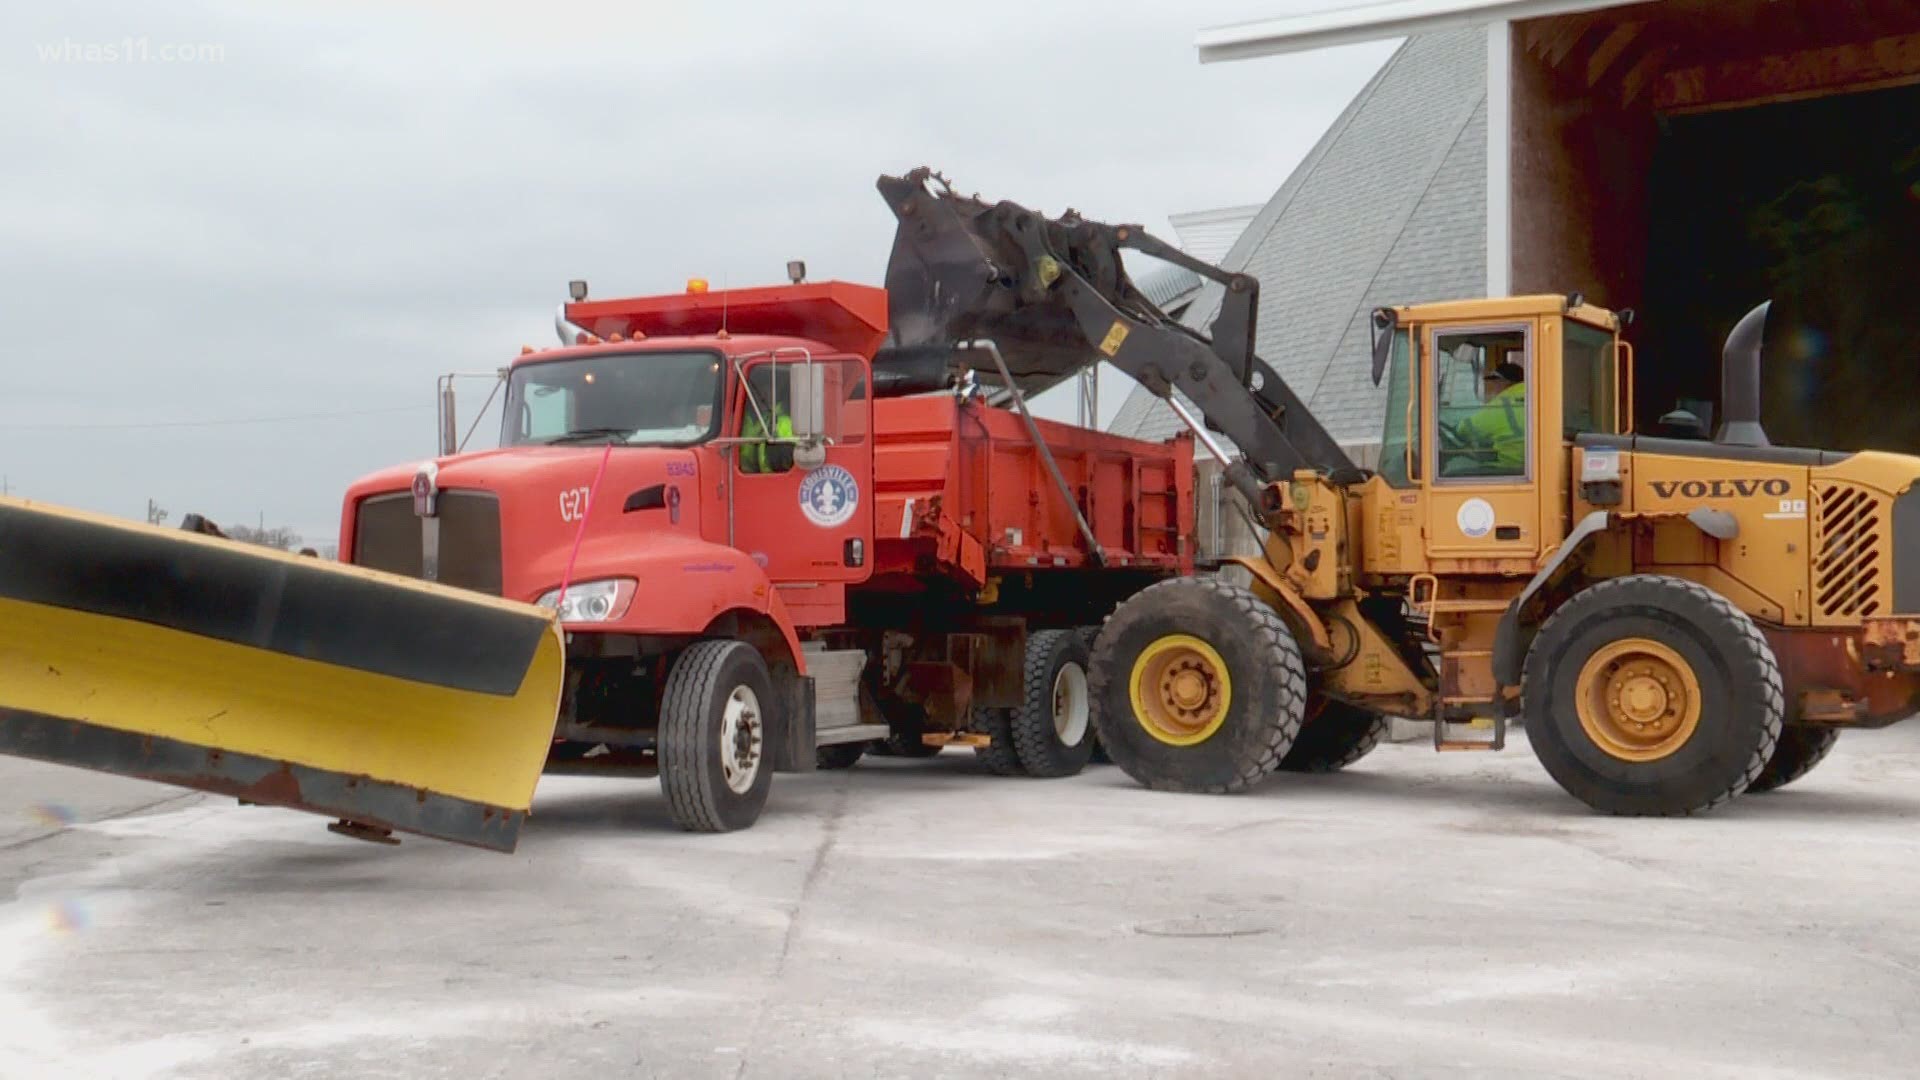 There is no shortage of salt in the Louisville area, with Metro Public Works starting the season with about 49,000 tons.